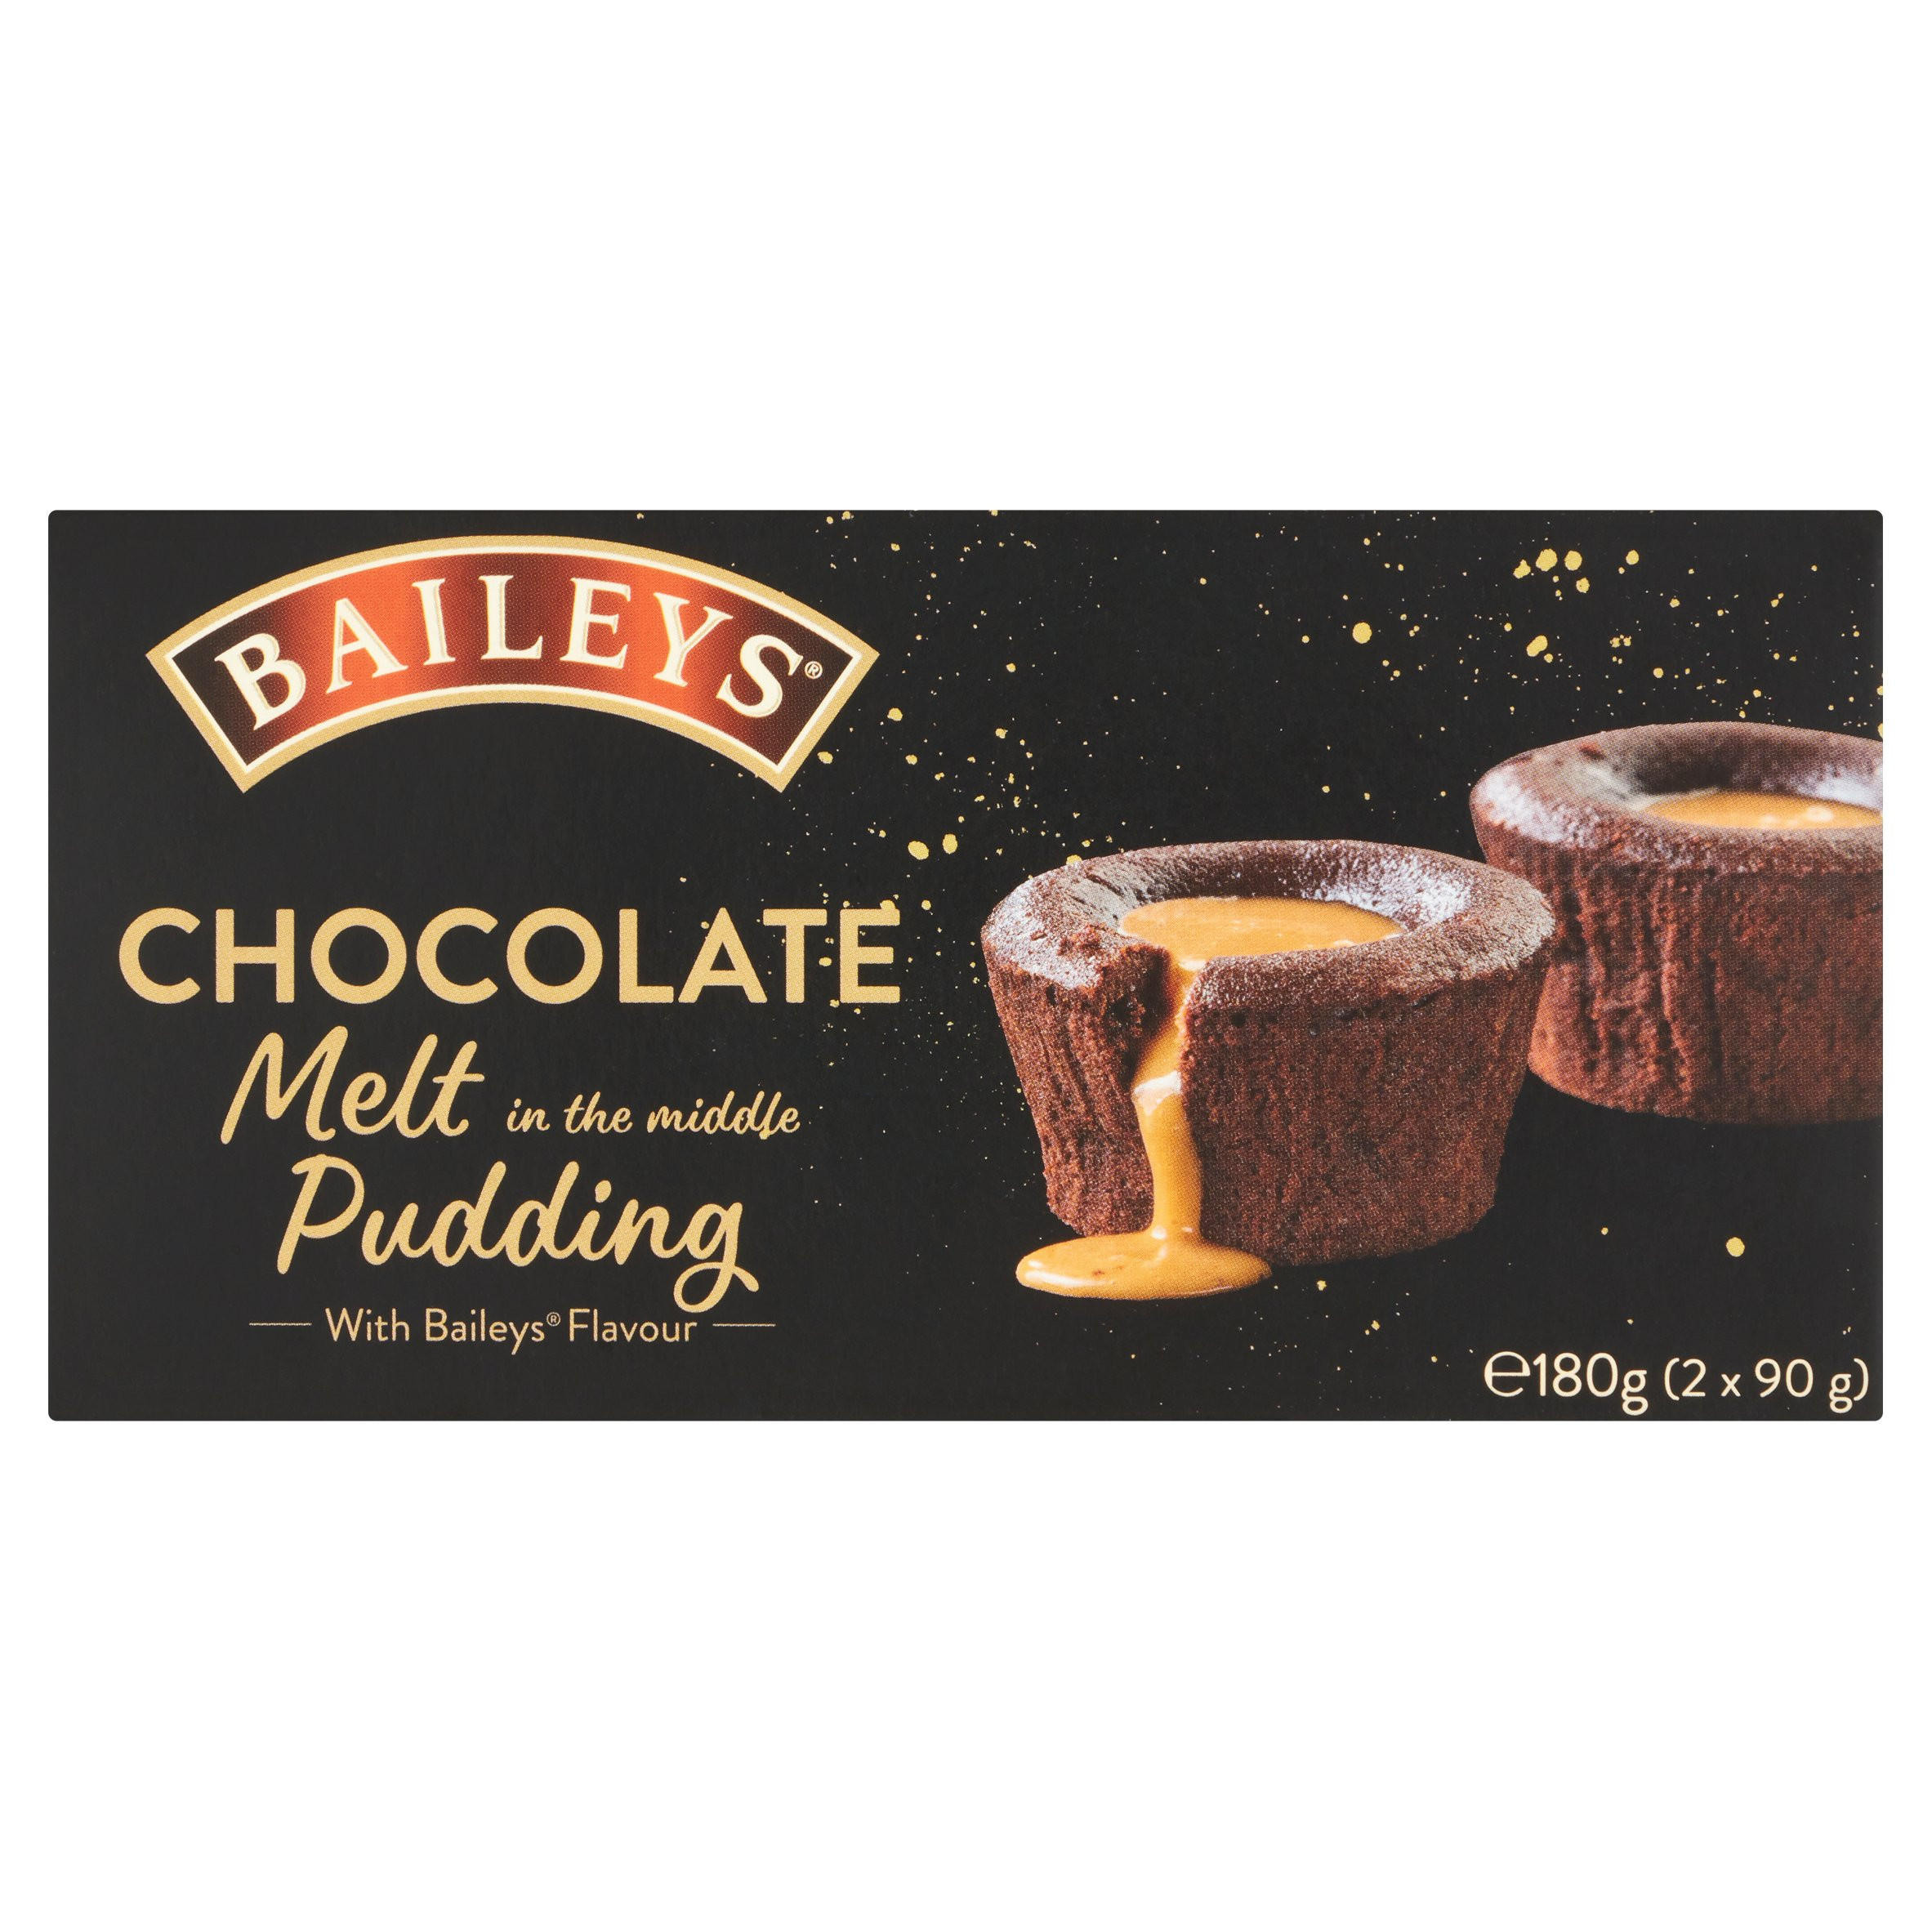 Baileys Chocolate Melt in the Middle Pudding 2 x 90g (180g)